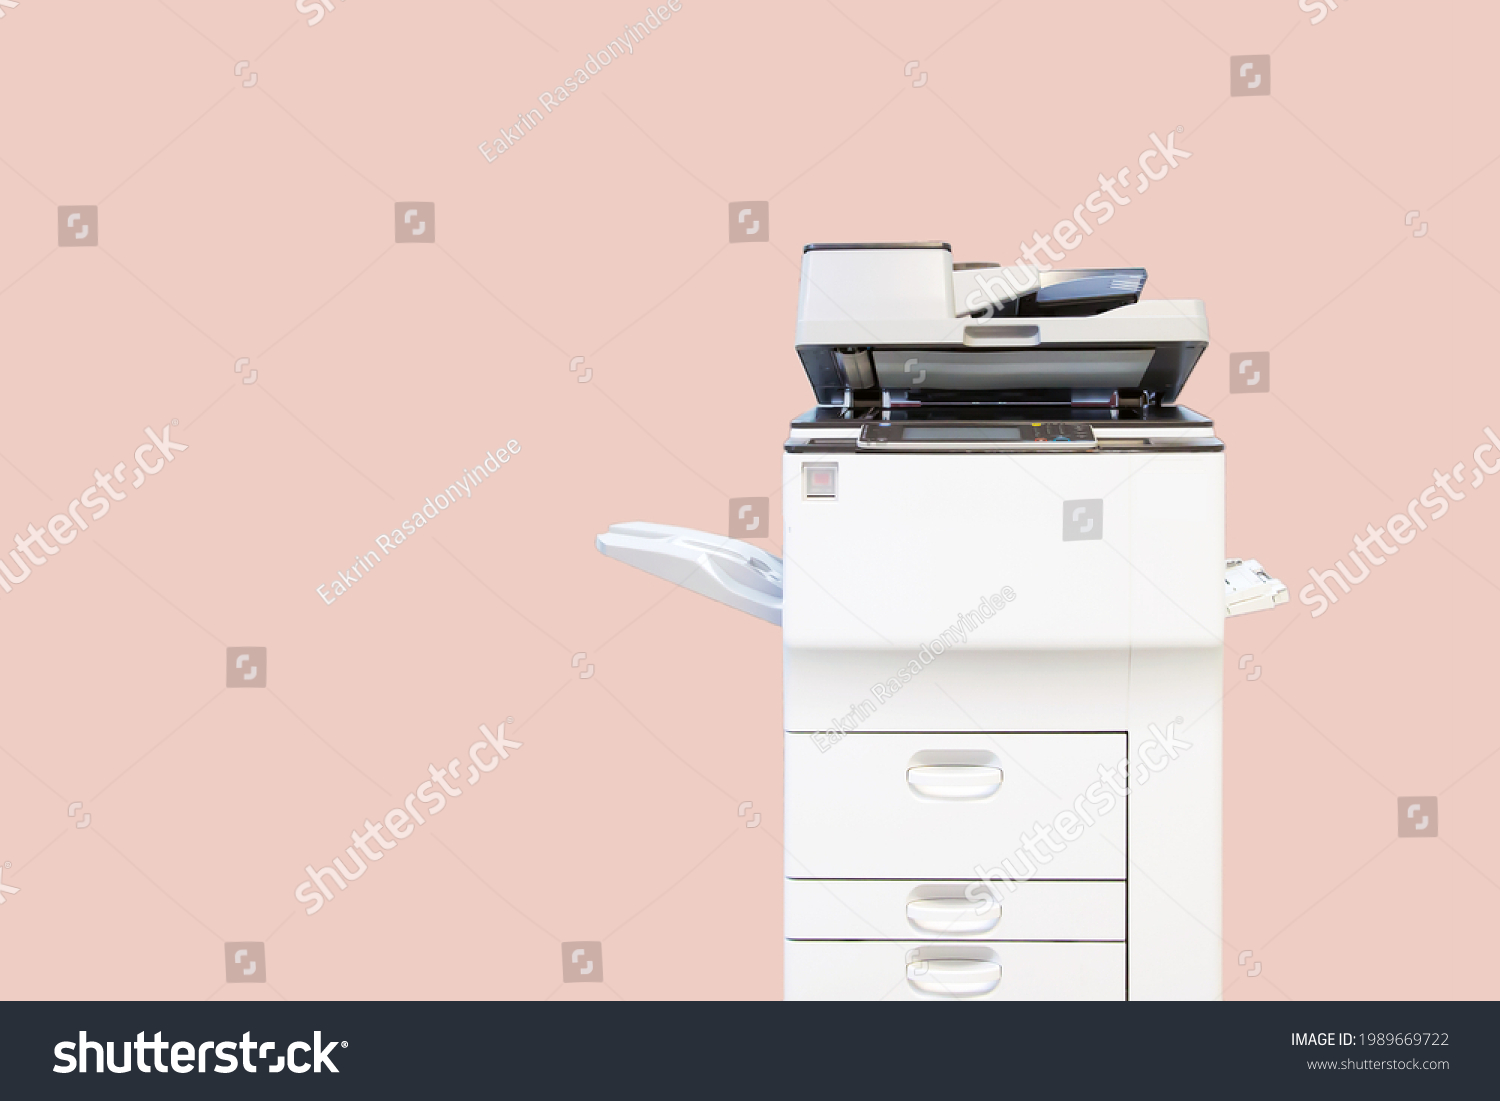 Copier printer, Close up the photocopier or photocopy machine for scanning document printing sheet or copy paper and xerox. #1989669722